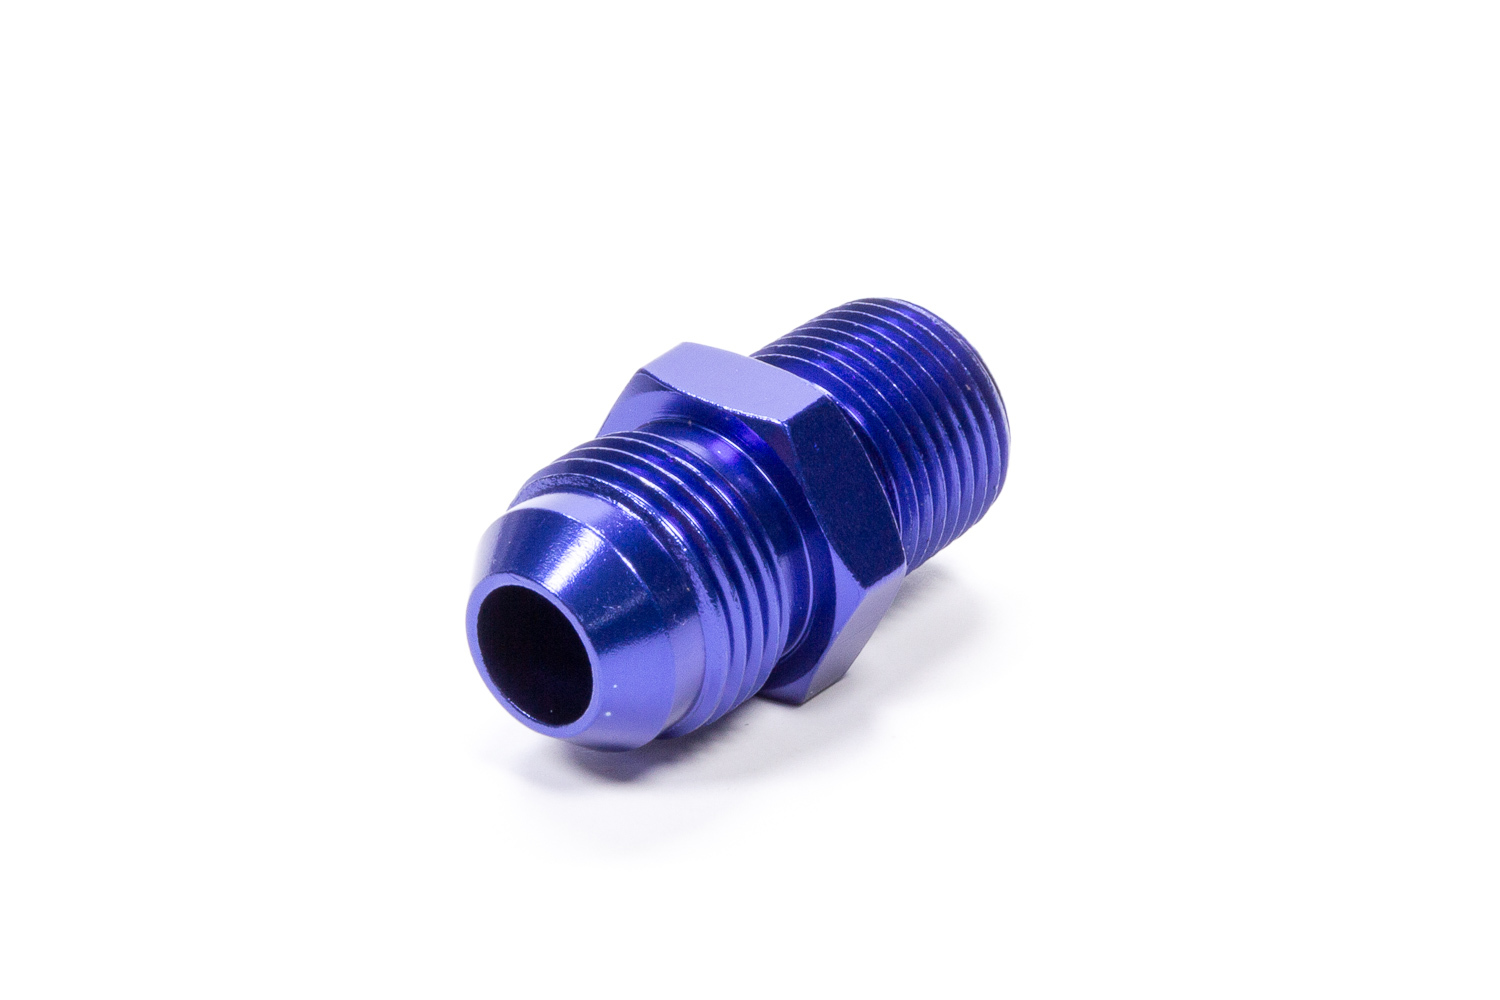 Fragola 481609 - Straight Adapter Fitting #10 x 3/4 MPT